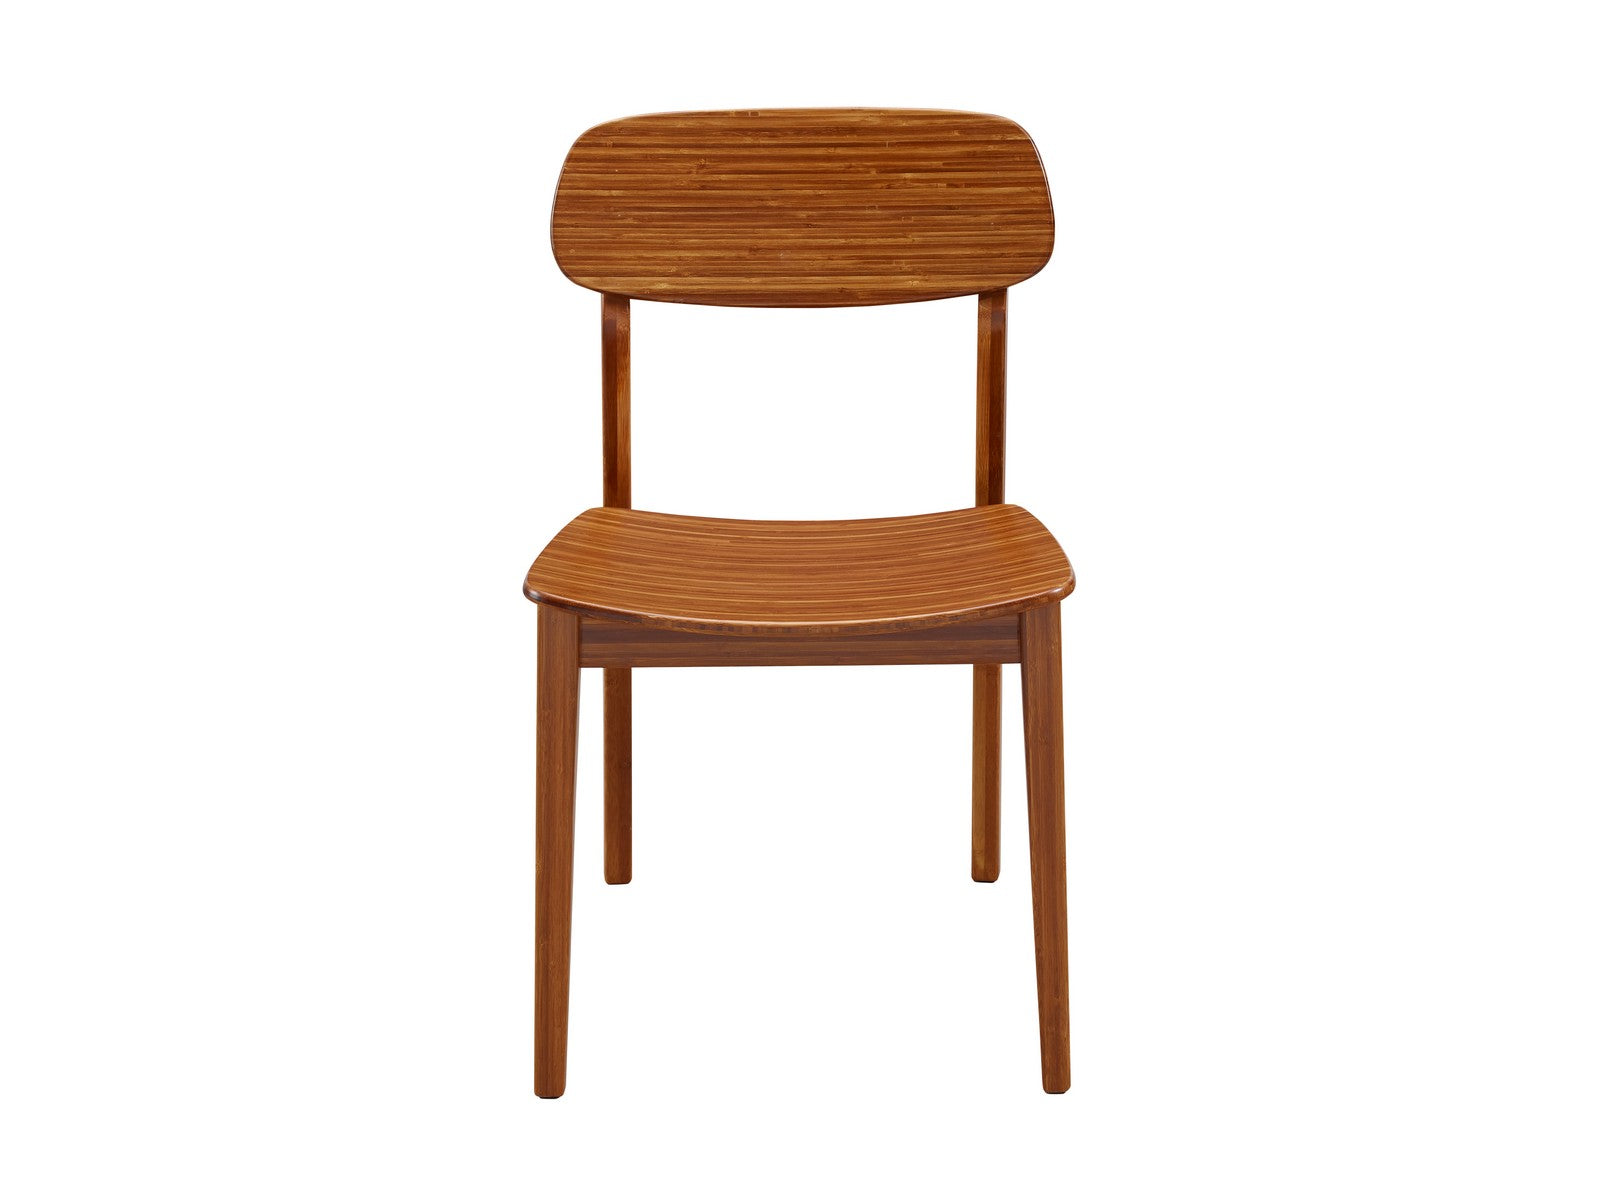 Greenington Currant Chair - Boxed set of 2, Amber - G0023AM - 4